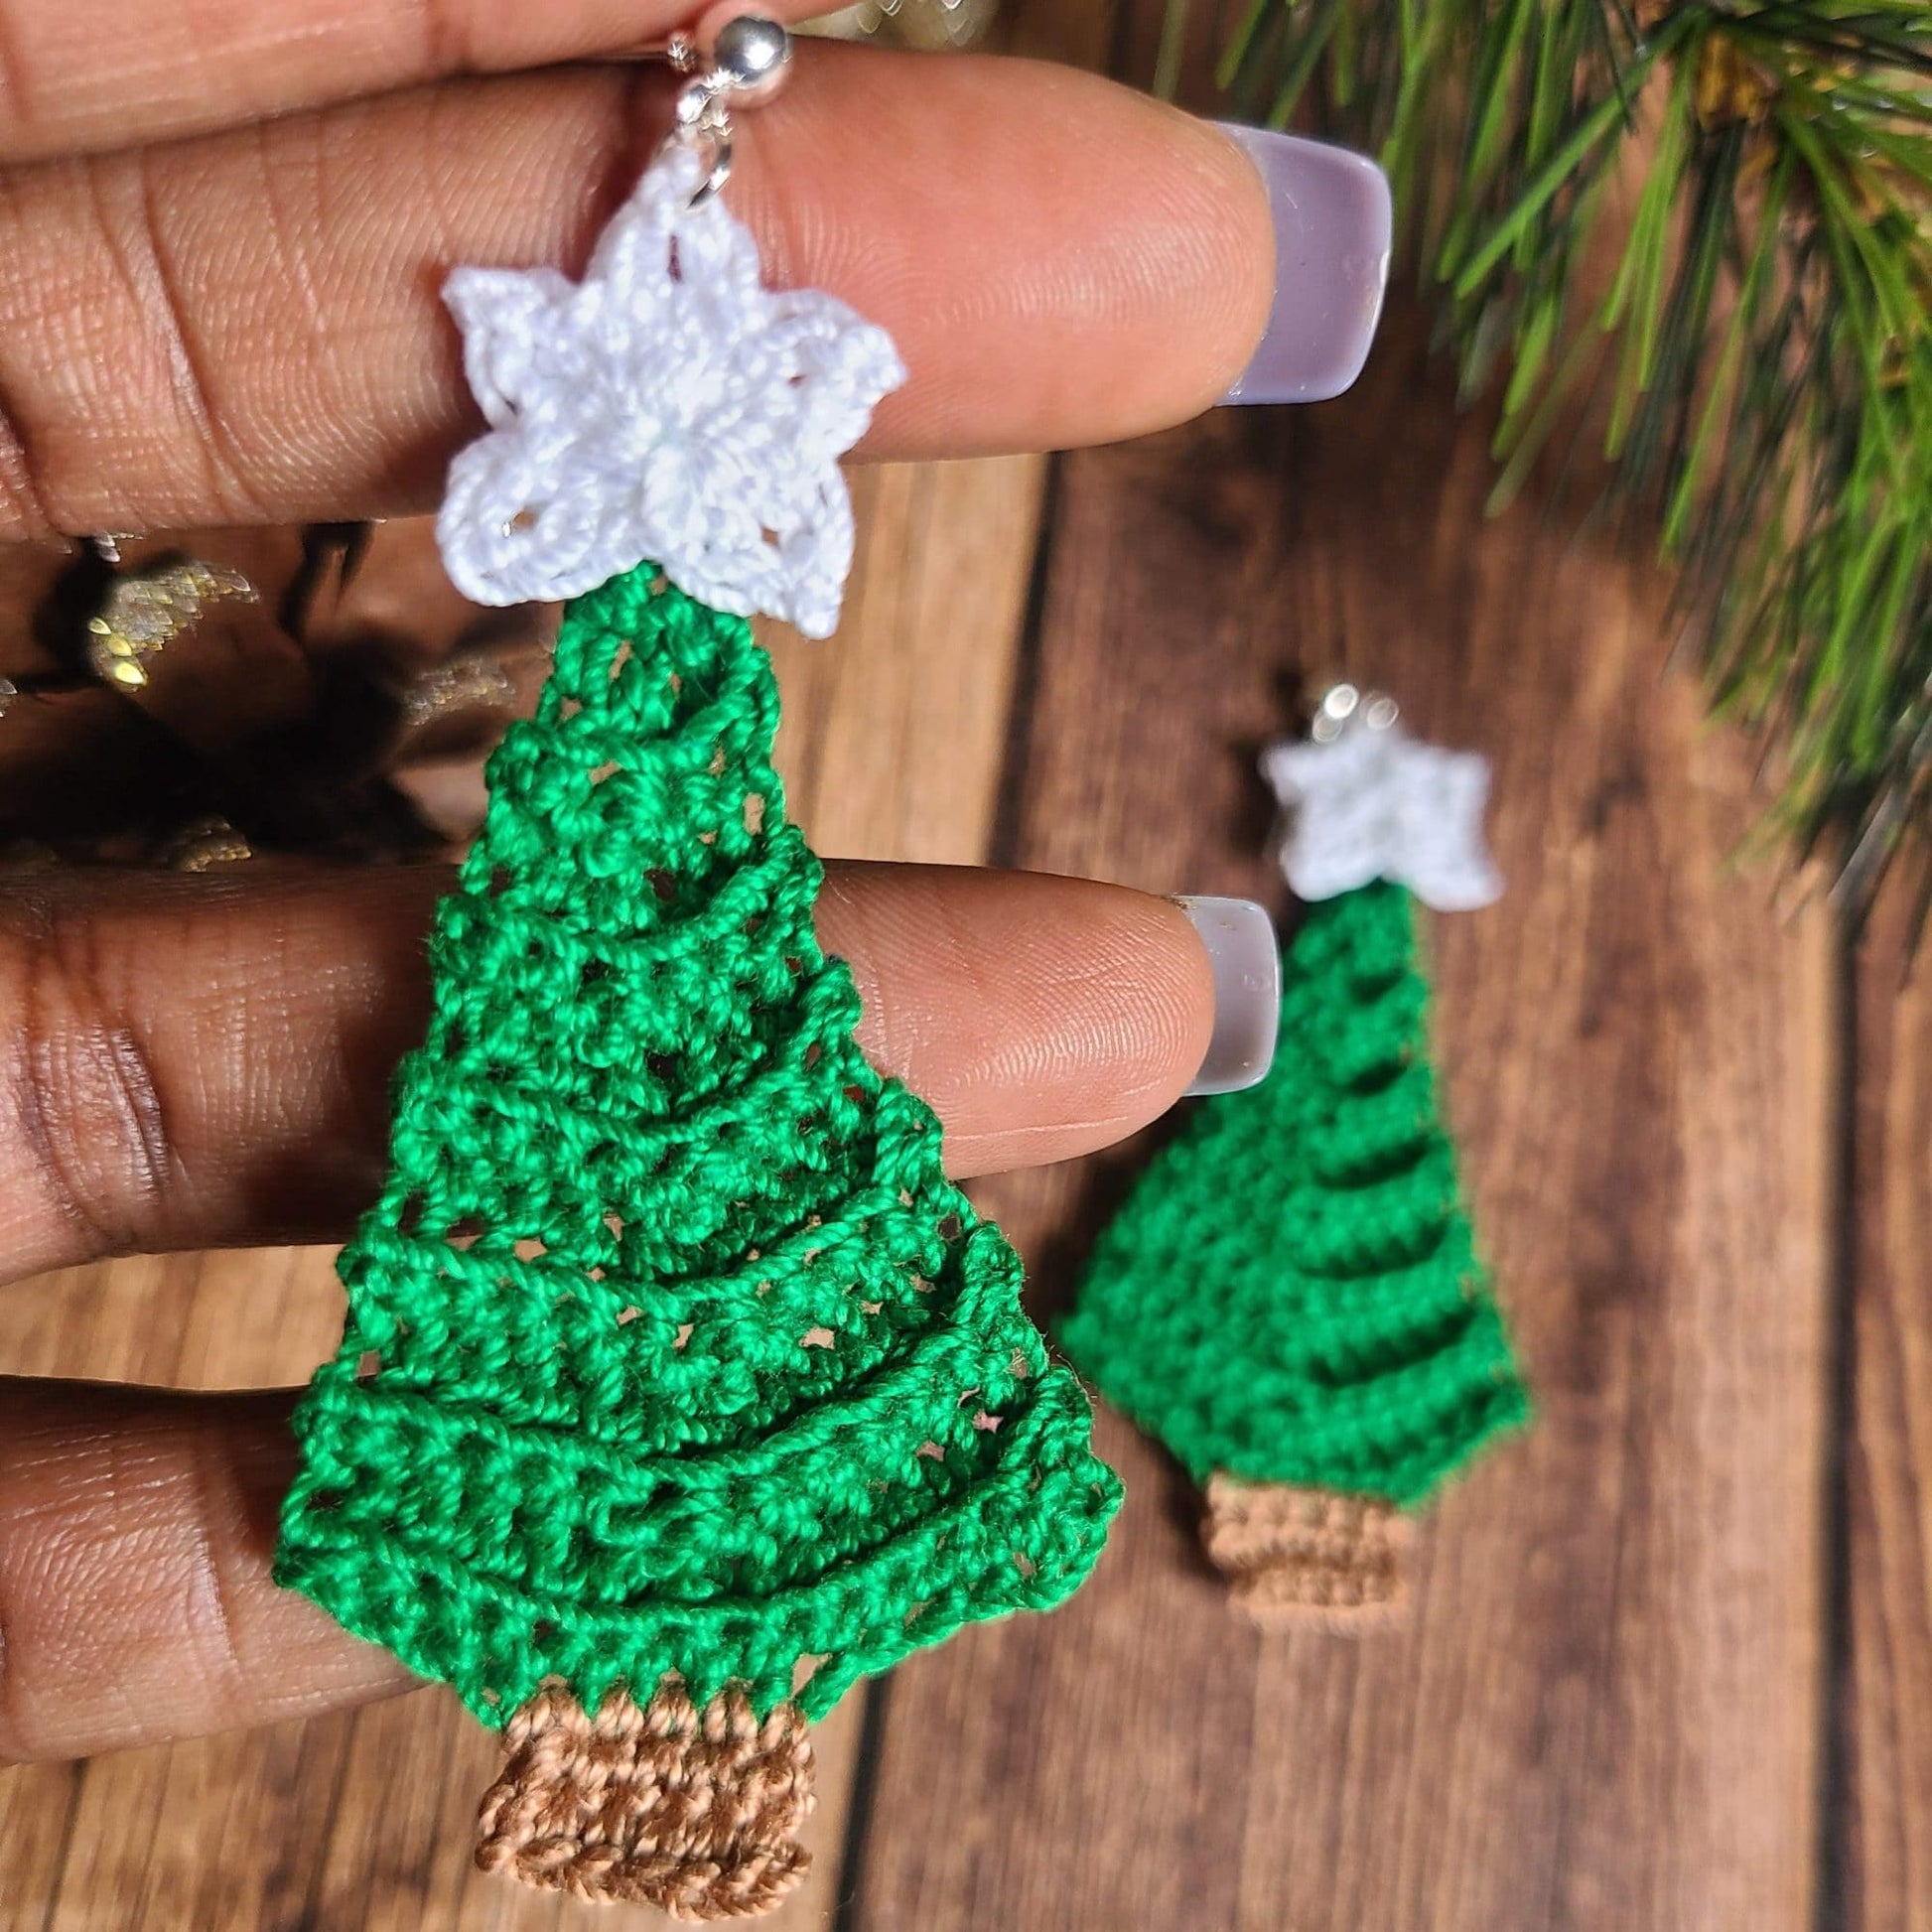 Christmas Tree dangle earrings in hand to show the size.